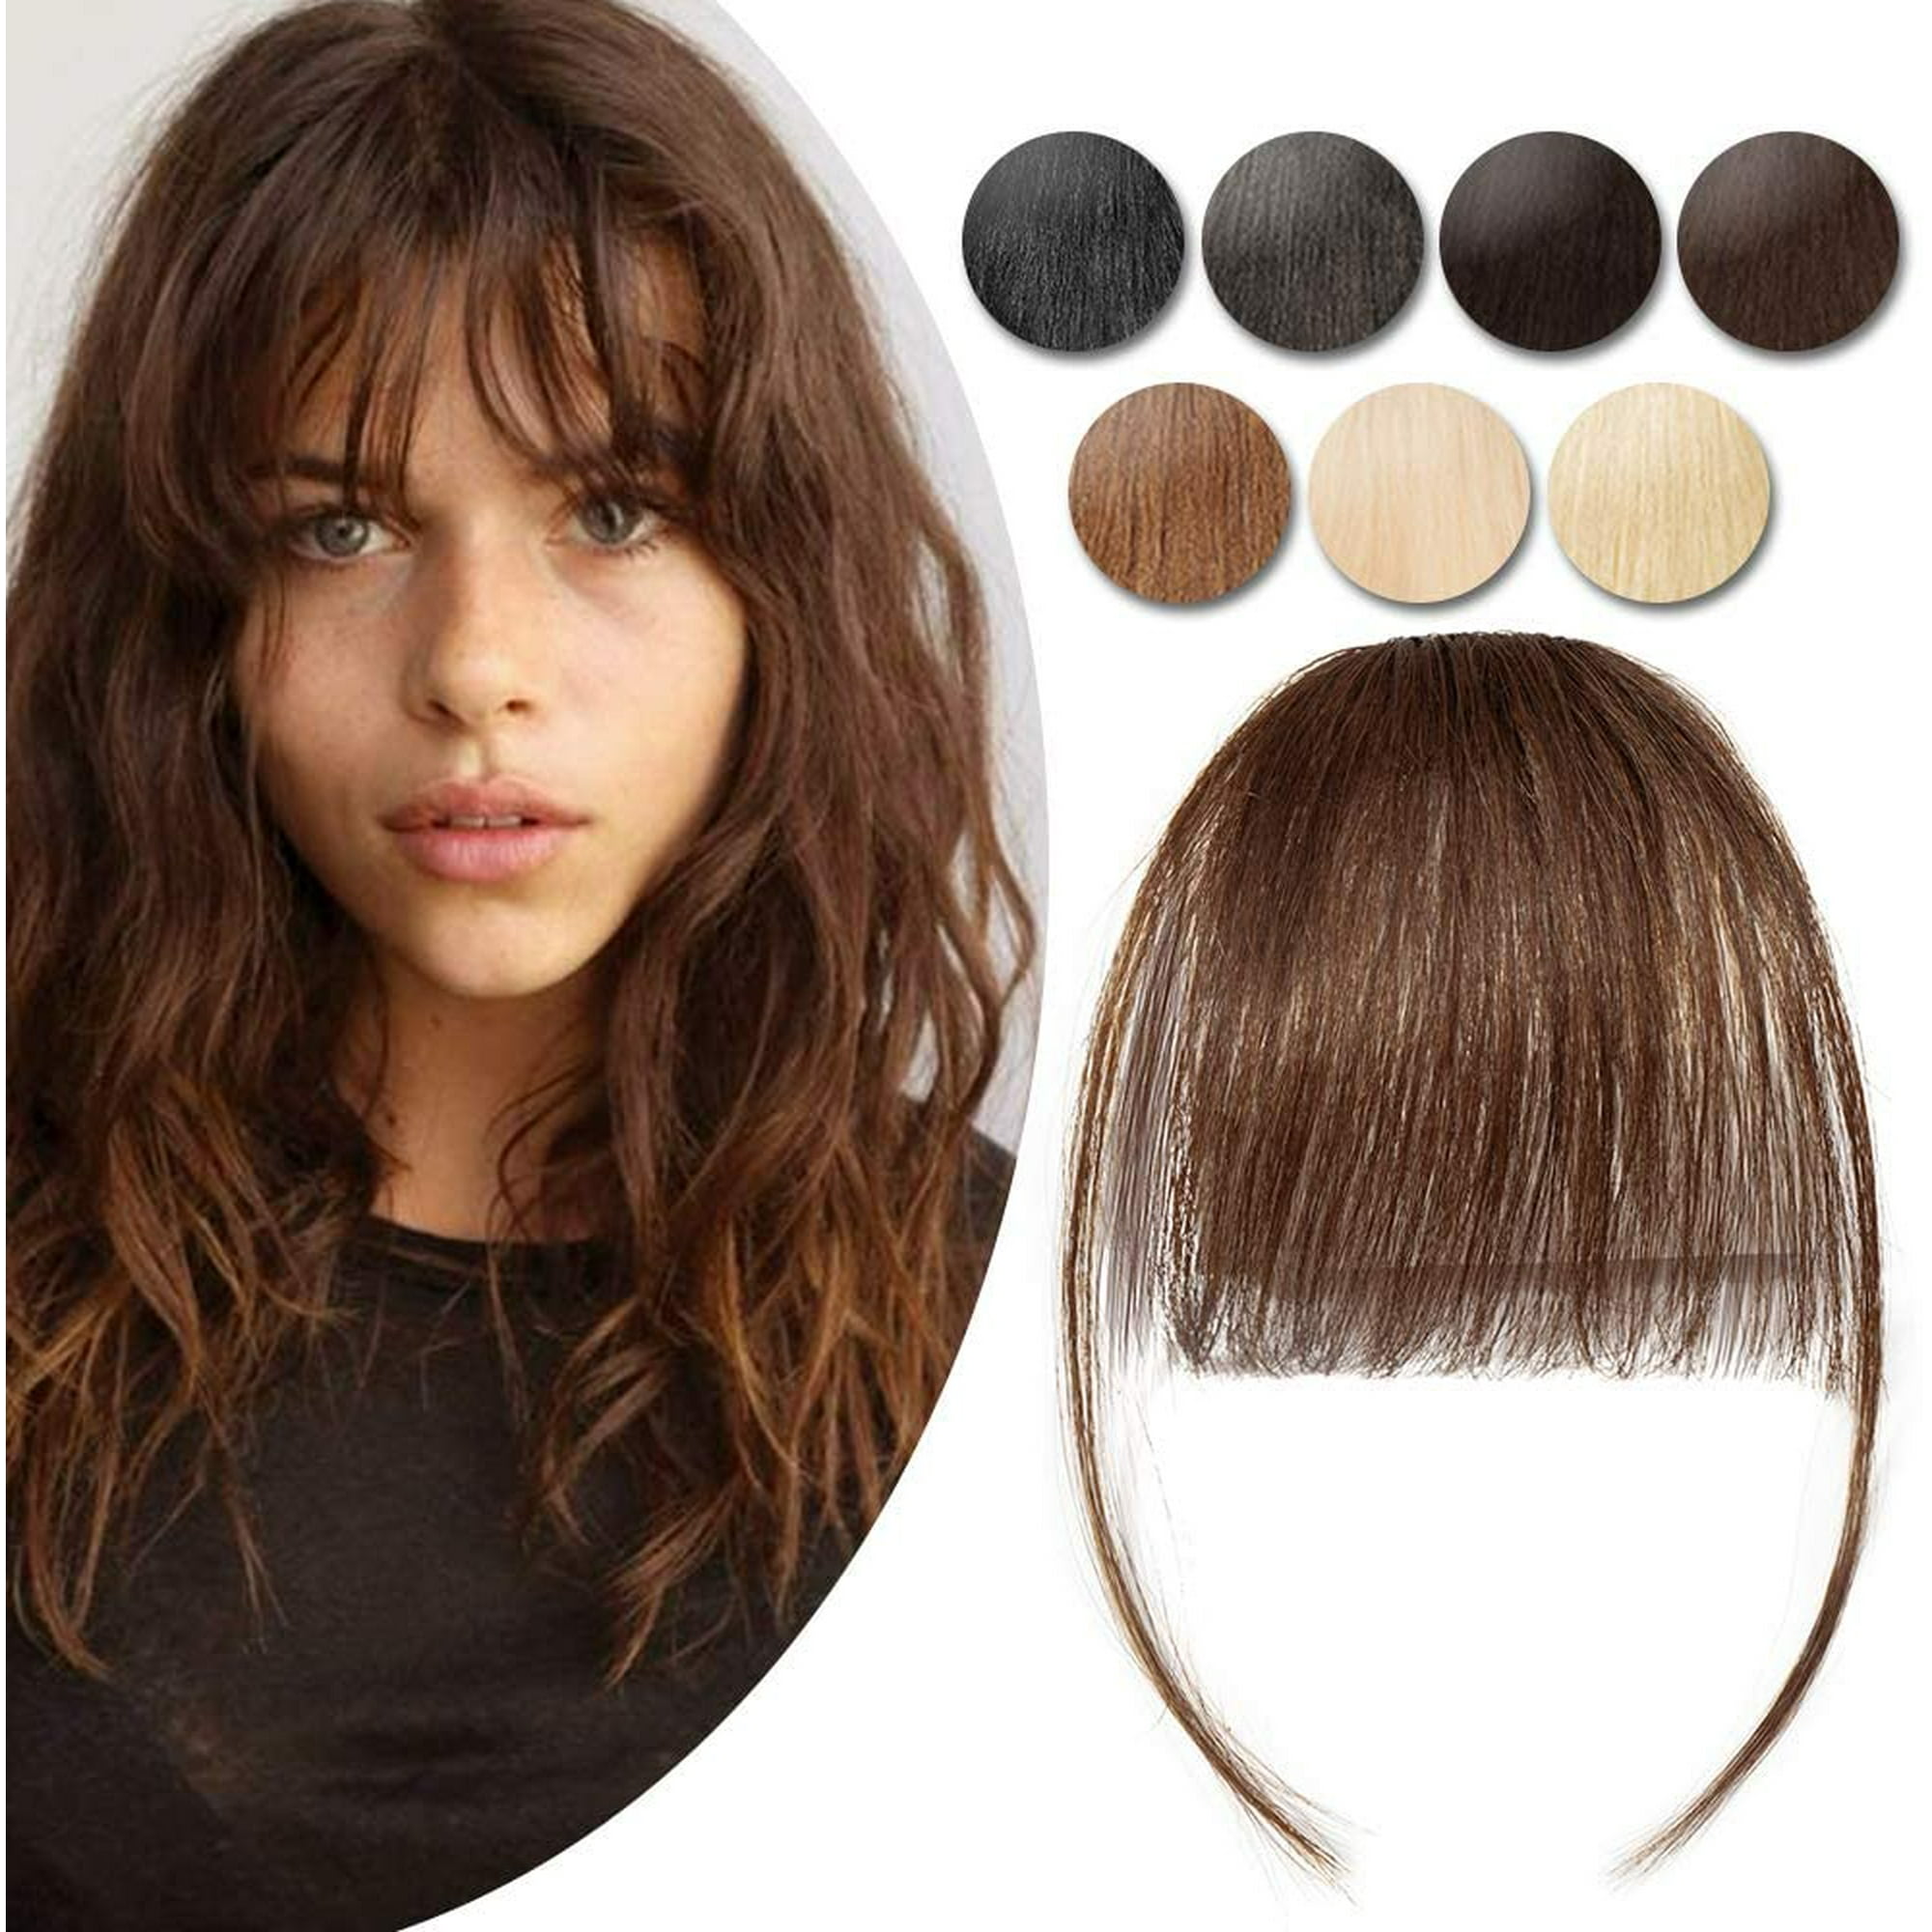 ALmi Clip In Bangs Human Hair Extensions Real Clip On Front Fringe  Hairpieces Wispy Air Side Bangs With Temple Thin Curtain Bangs Hair Clip  Top Hairpiece For Women 5g #04 Medium Brown |